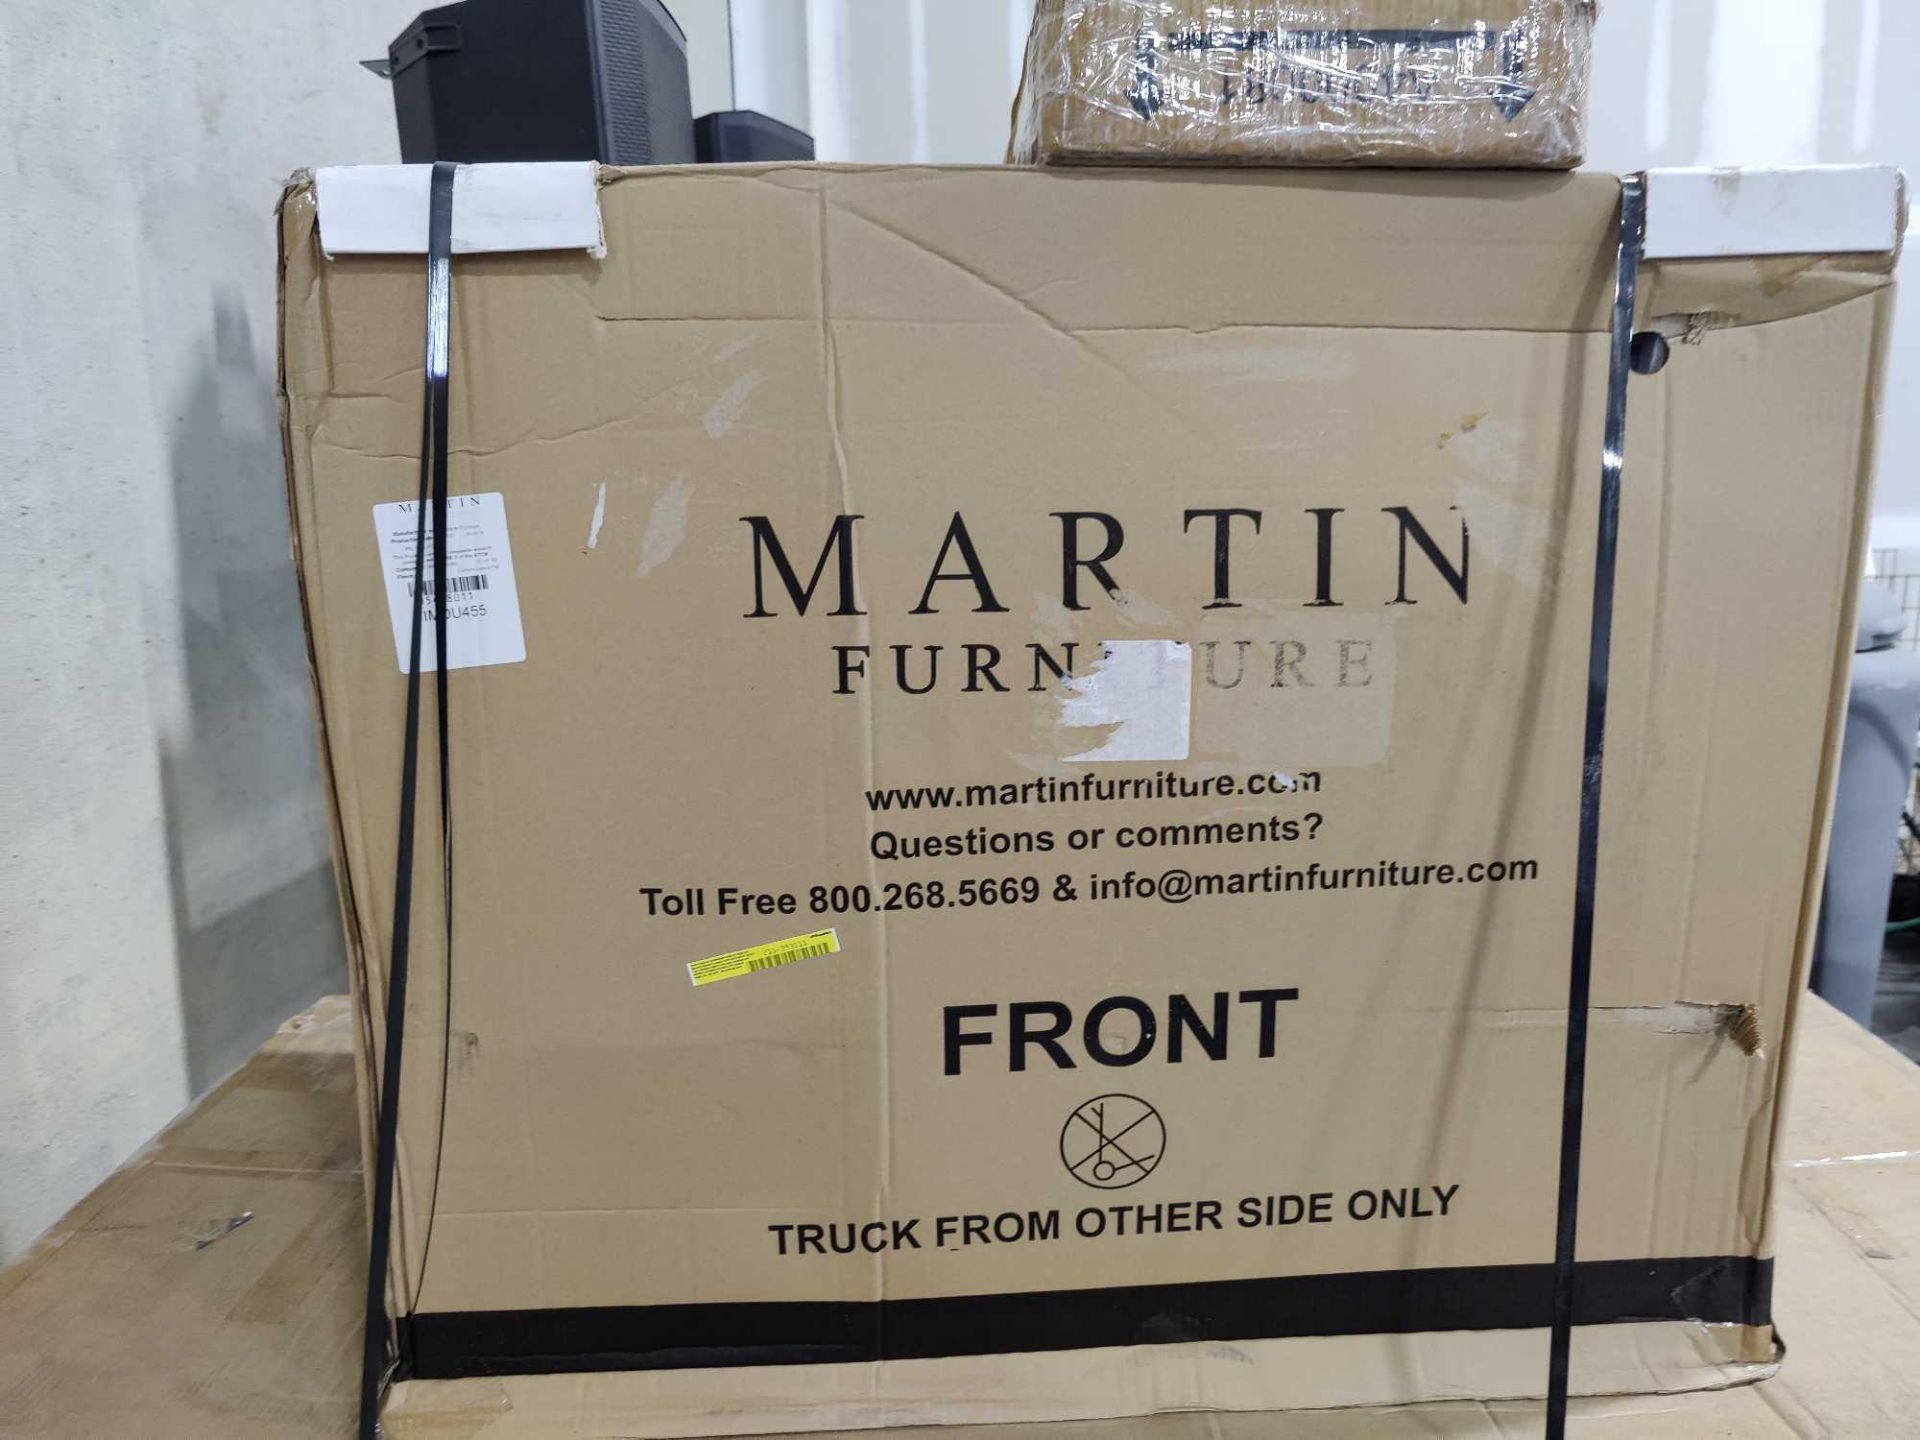 Martin furniture items - Image 2 of 6